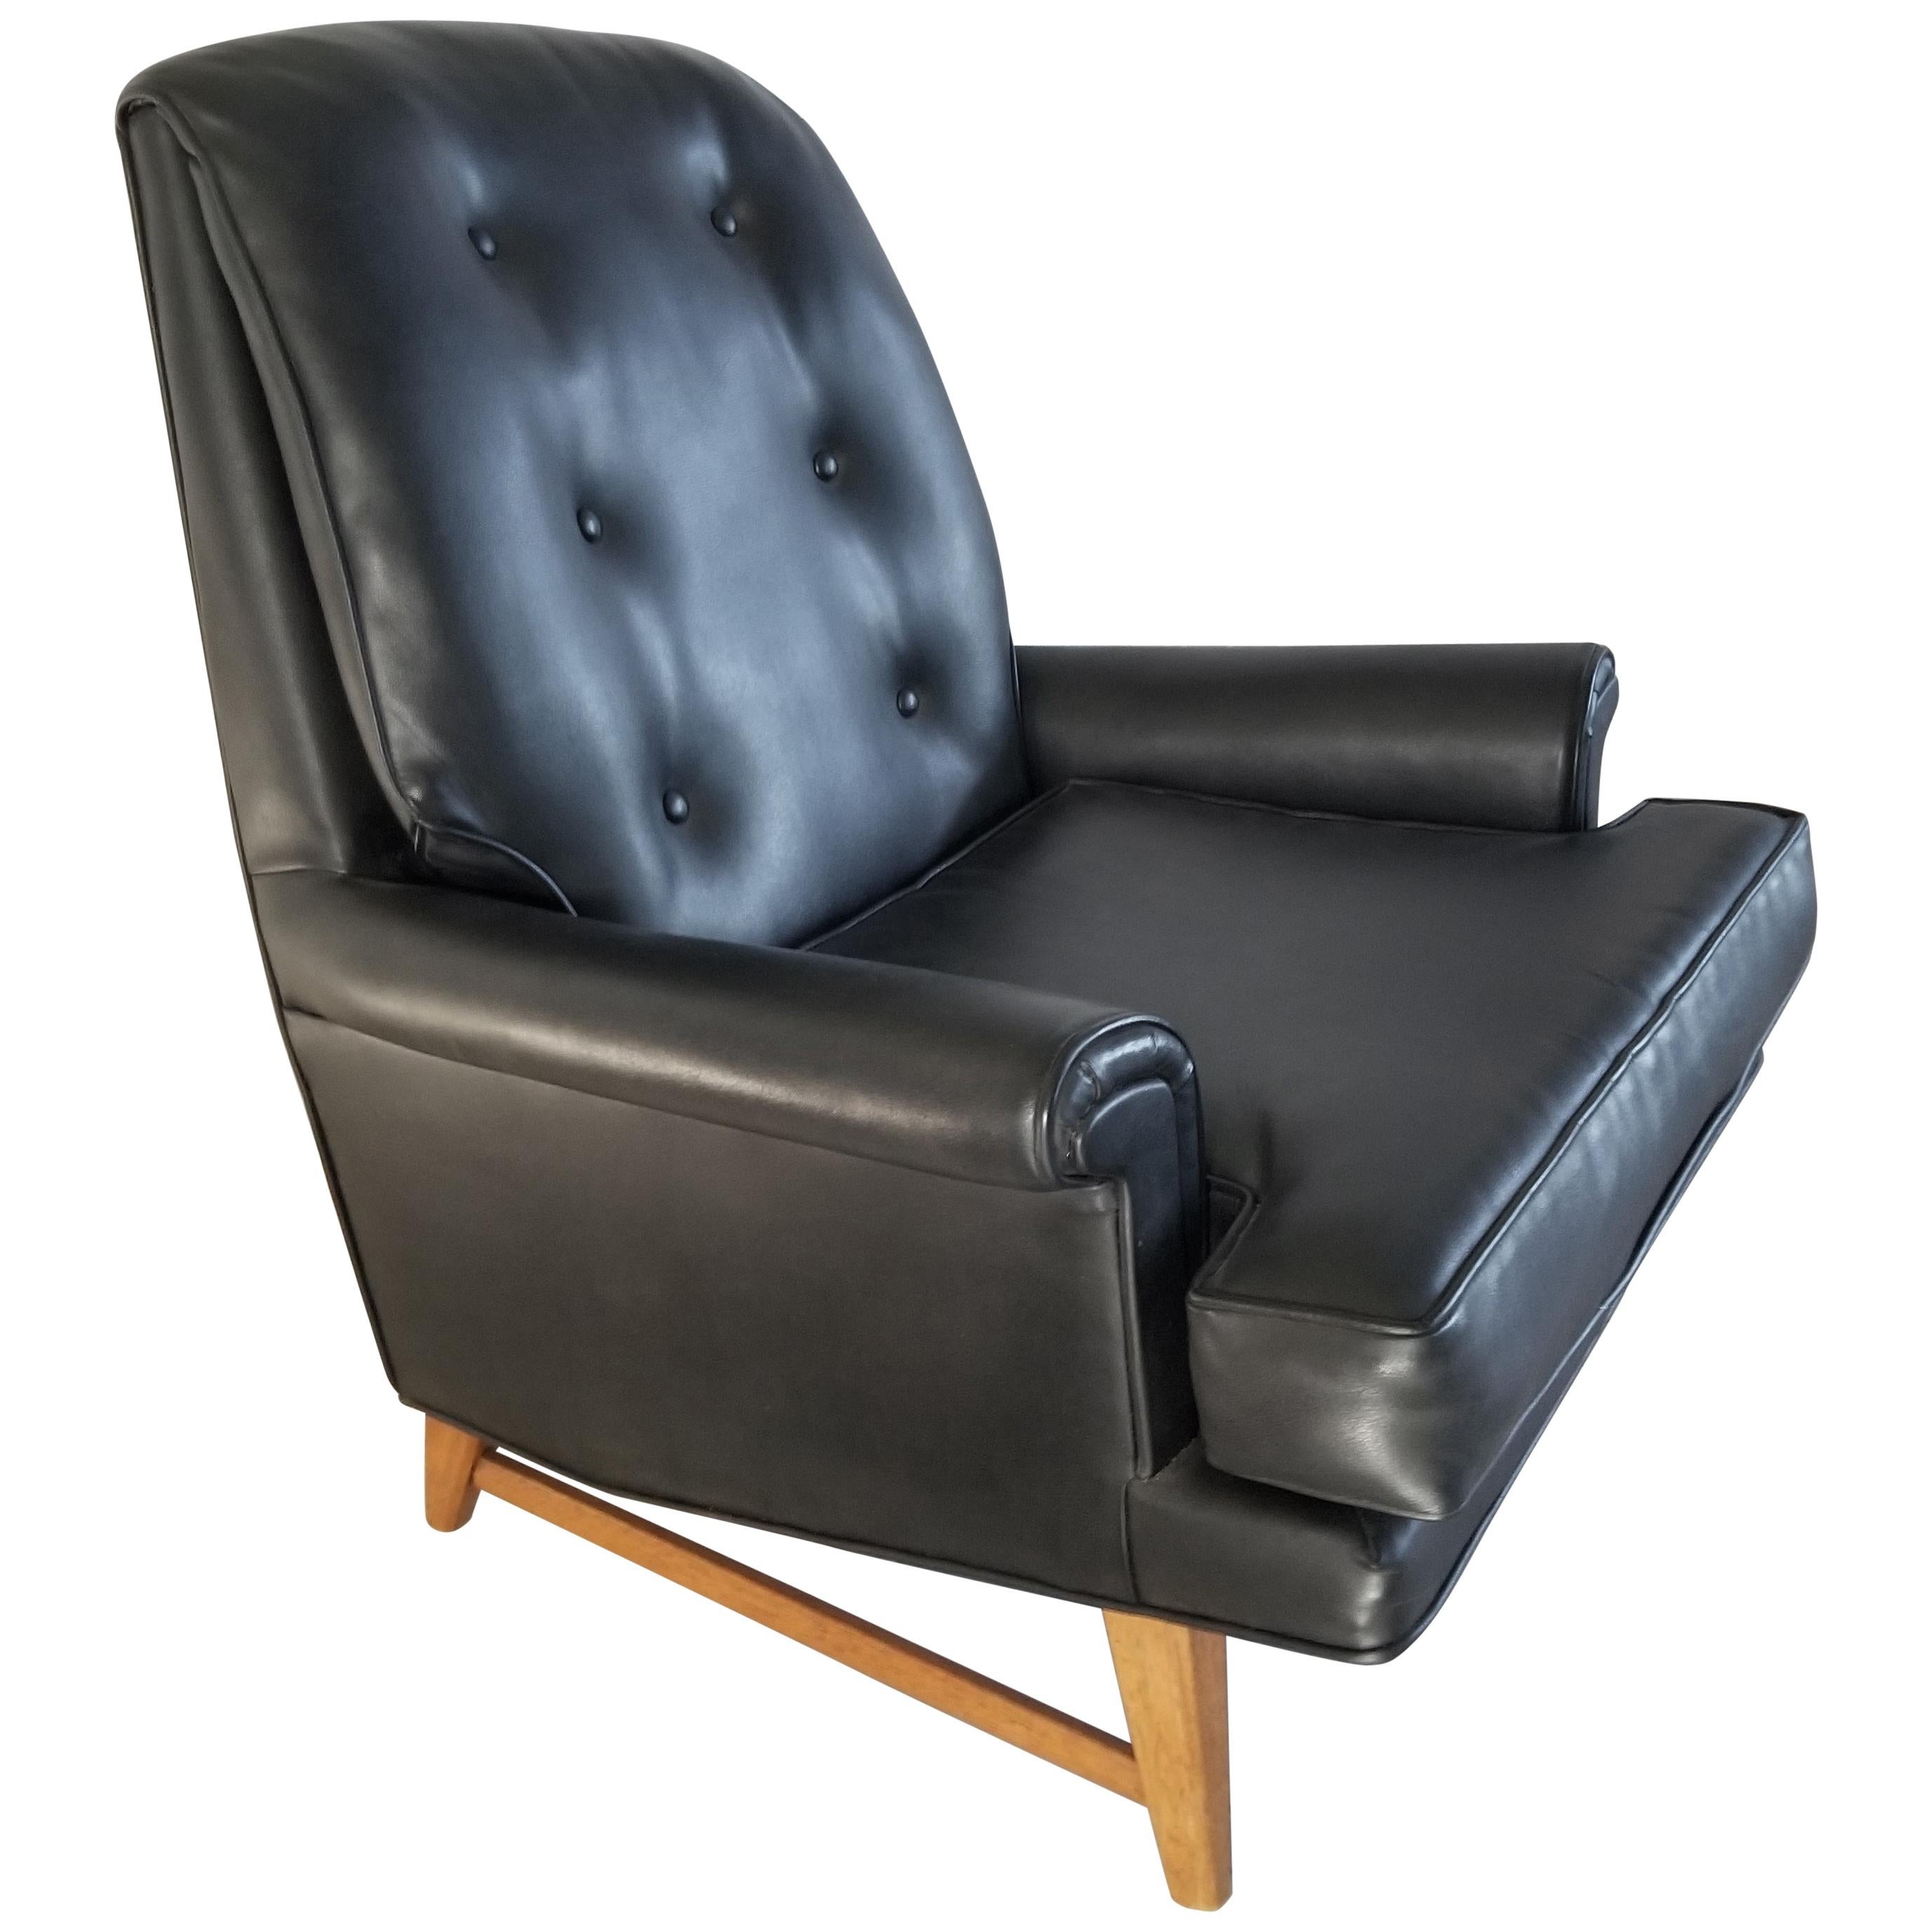 Midcentury Lounge Chair
Handsome Heritage Black Faux Leather Tufted Lounge Chair Edward Wormley for Dunbar Furniture Era
Faux leather that really looks like leather.
Comfort and good looks perched on a strong mahogany wood base.
Maker label, signed